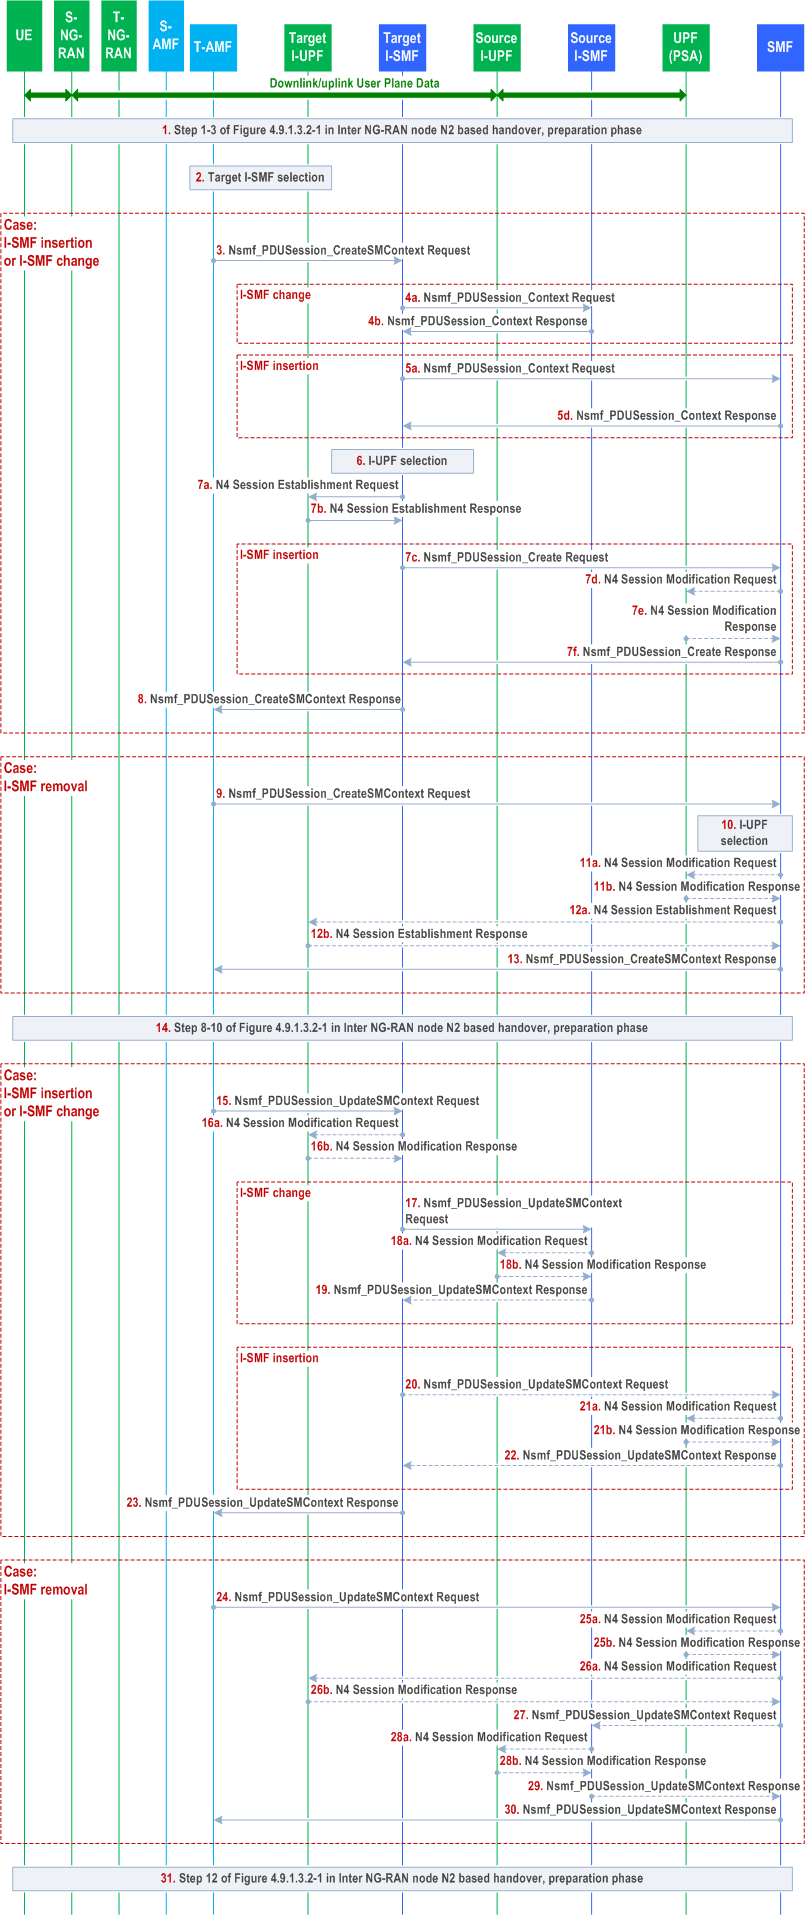 Reproduction of 3GPP TS 23.502, Fig. 4.23.7.3.2-1: Inter NG-RAN node N2 based handover, preparation phase, with I-SMF insertion/change/removal